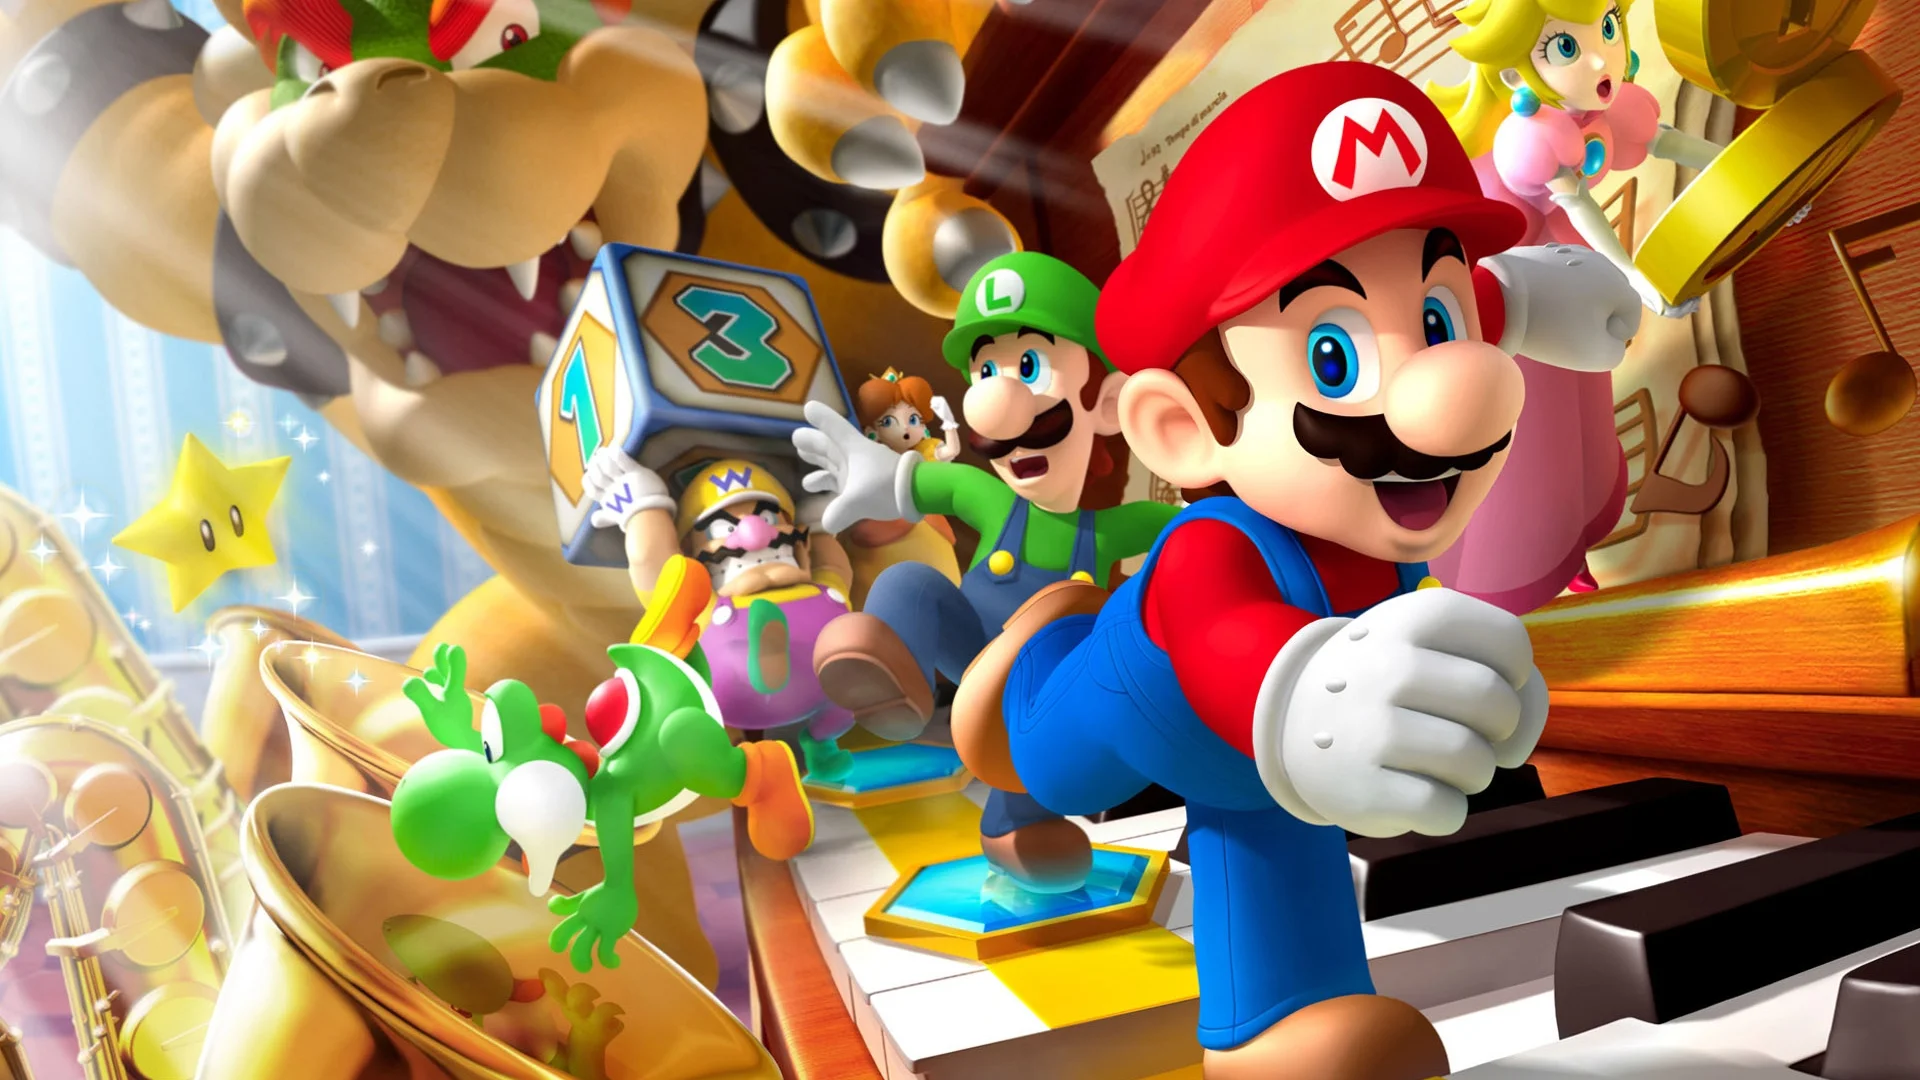 The Super Mario Bros. Movie overtakes Frozen as the highest-grossing animated film of all time